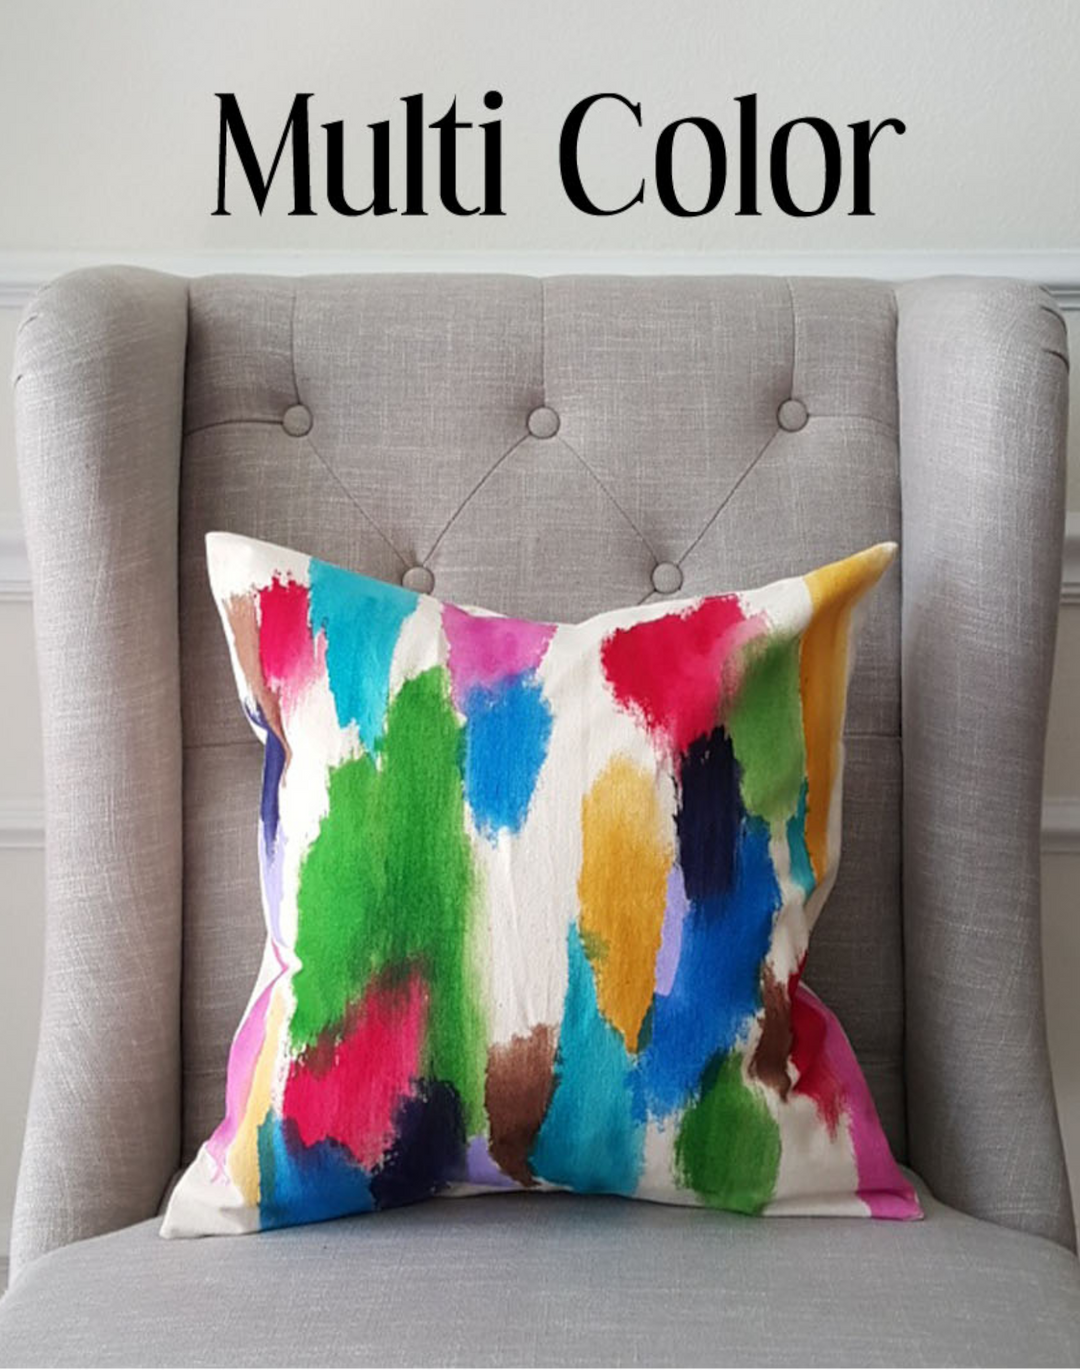 Julie Kay Hand Painted Watercolor Pillow Cover, Multi Colored